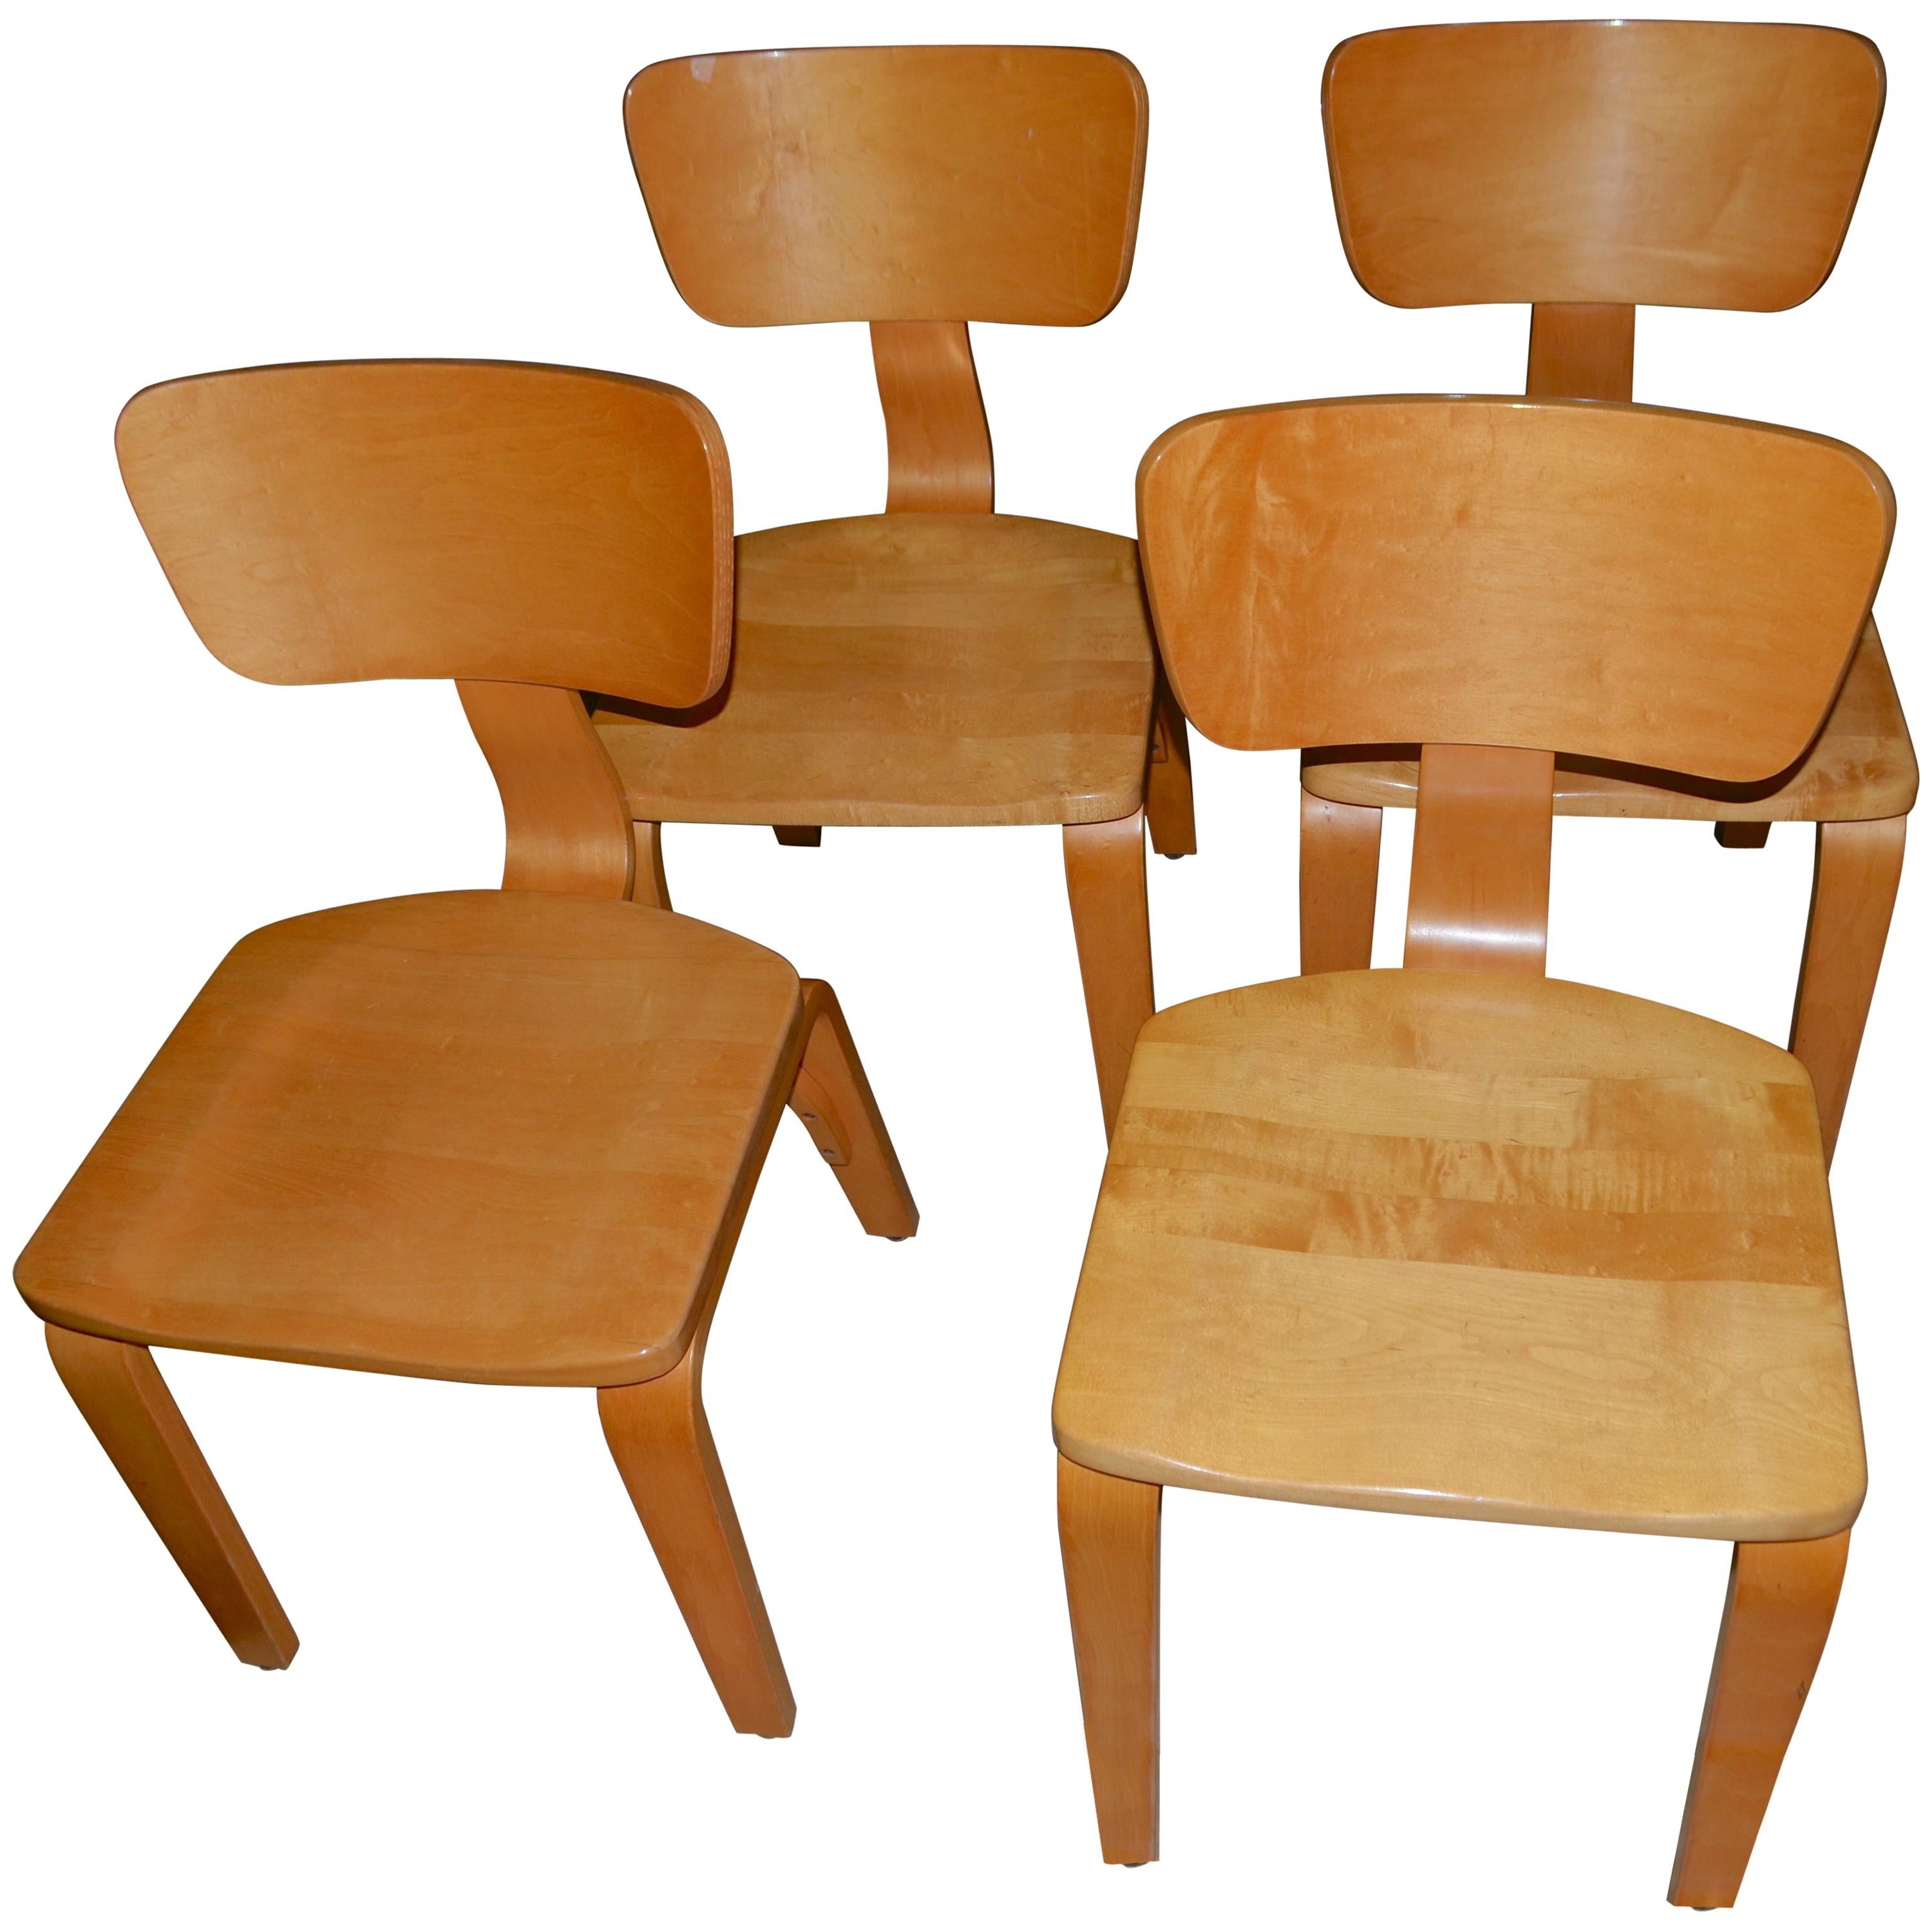 Reserved for Alexandra: Thonet Maple Dining Chairs with Bentwood, Set of Four